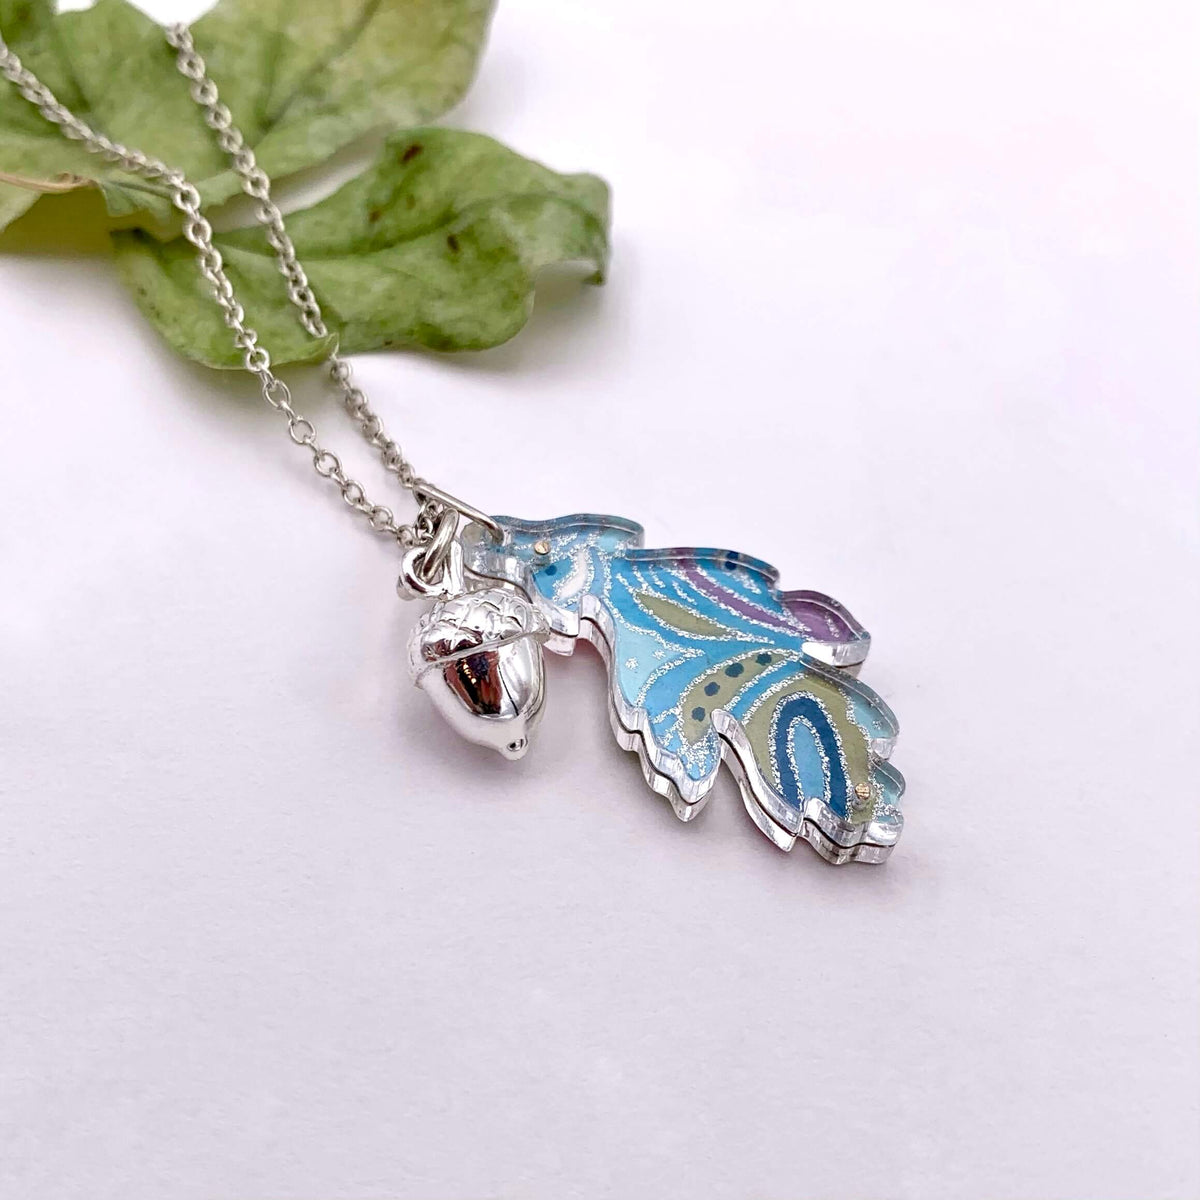 Handmade silver chain necklace, featuring a solid silver acorn and colourful reversible leaf. Leaf is made from blue floral hand-painted paper, between two layers of perspex.